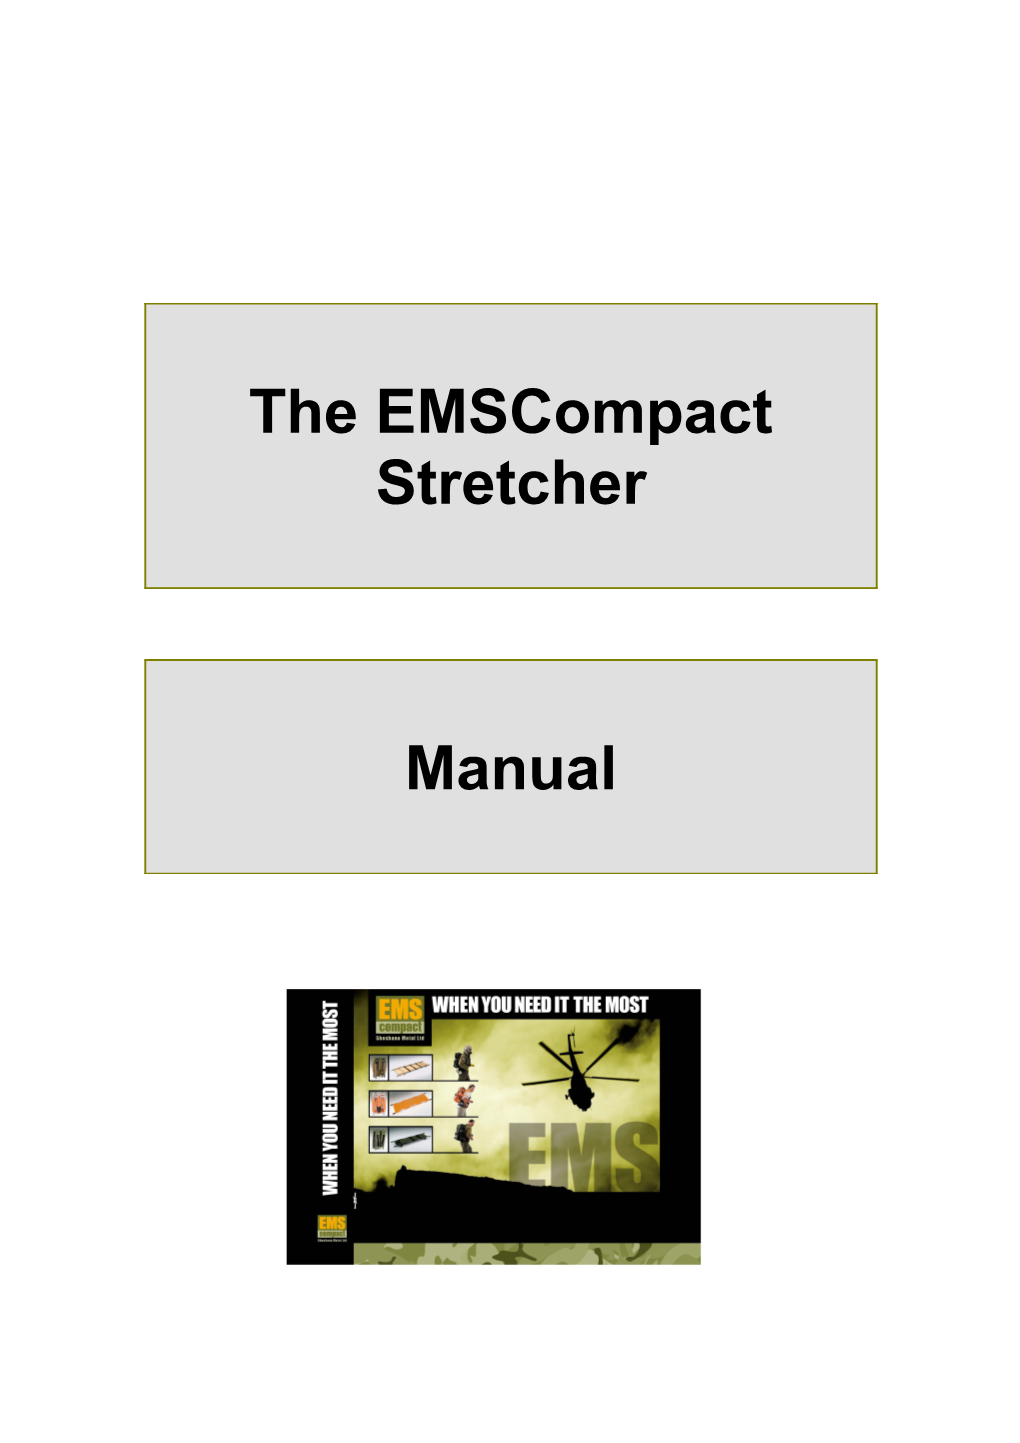 Instructions for Extending the Emscompact Stretcher5